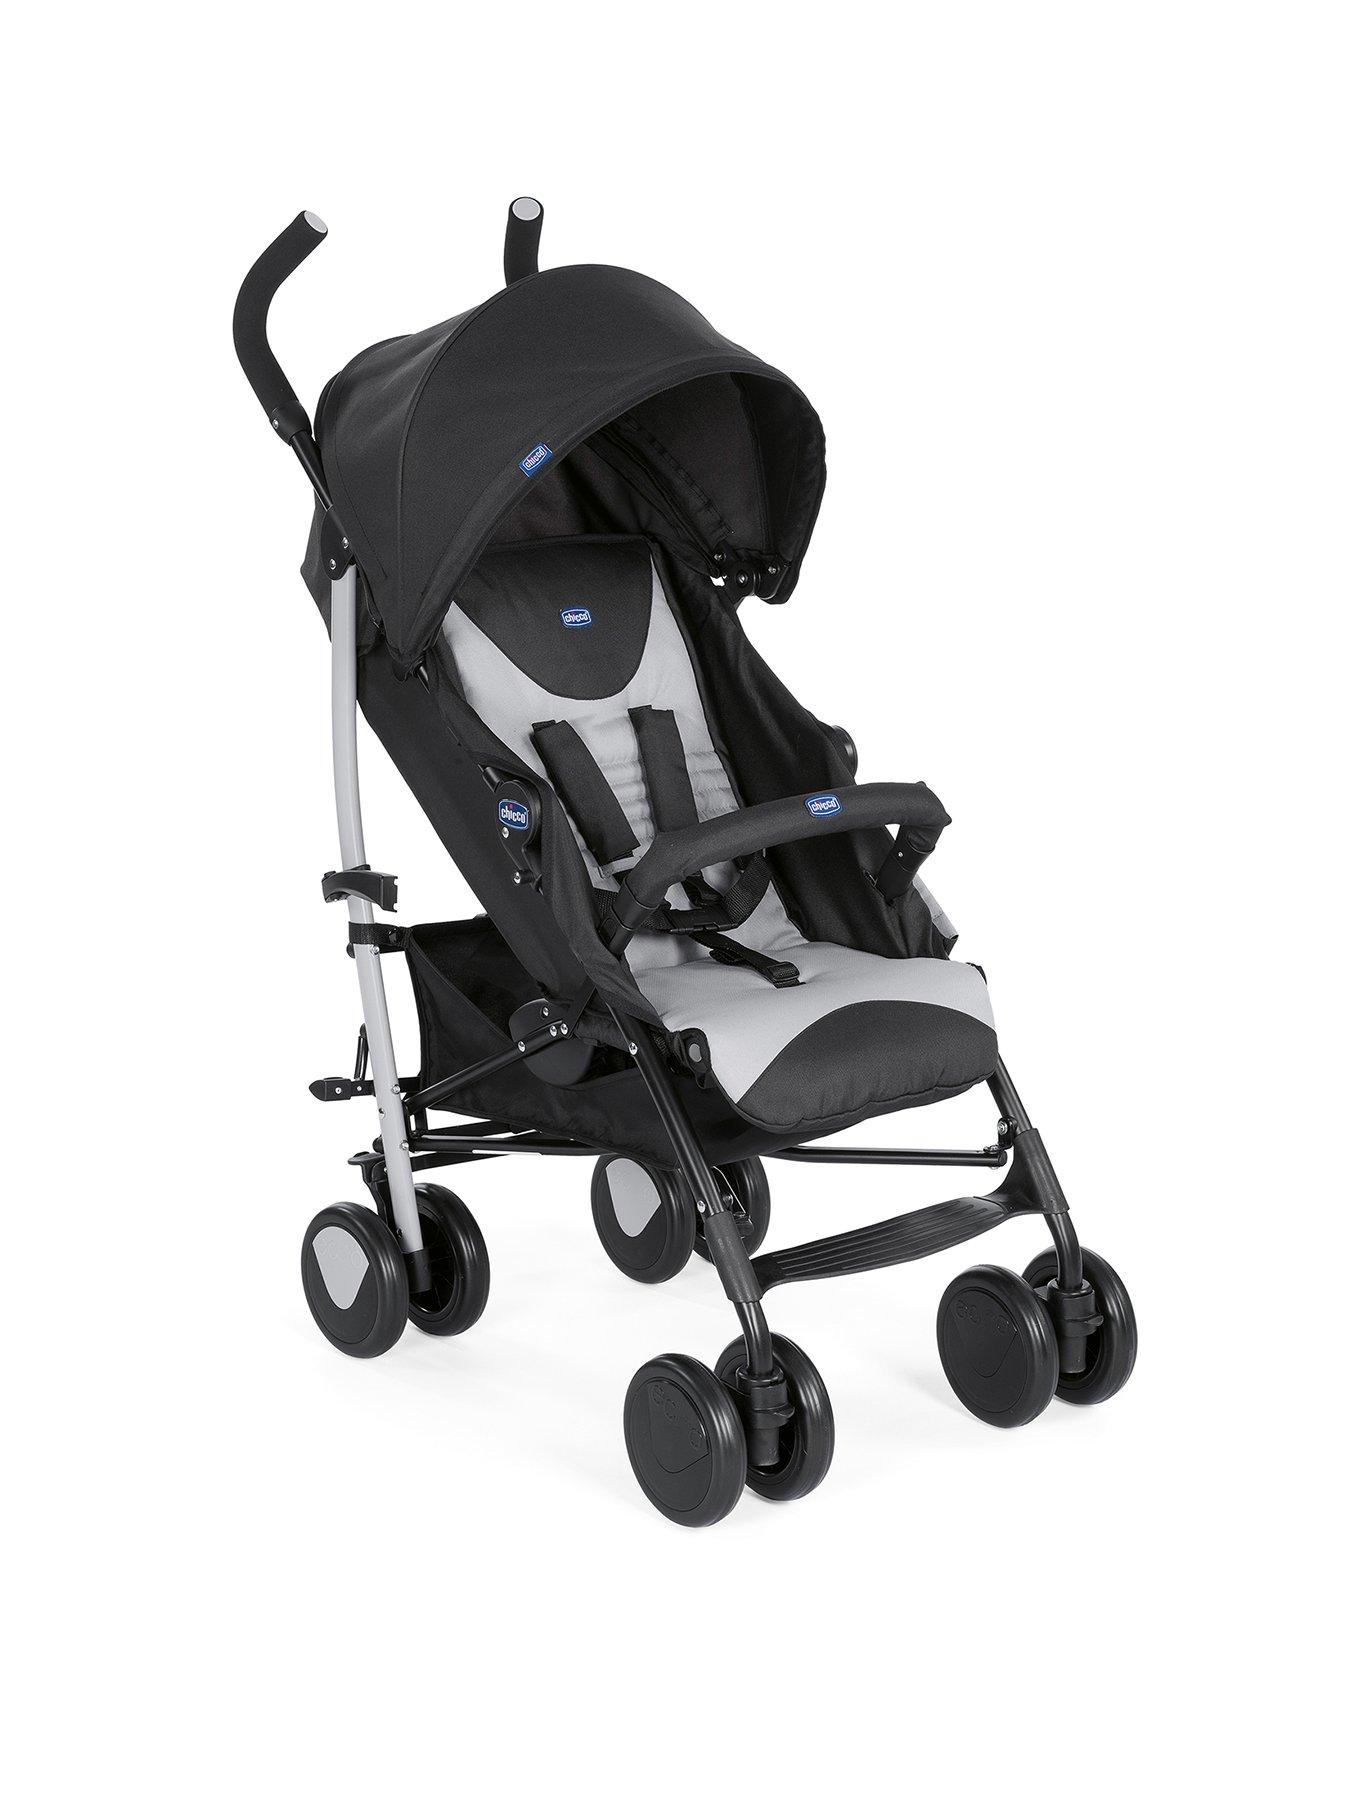 pushchairs for toddlers over 15kg uk